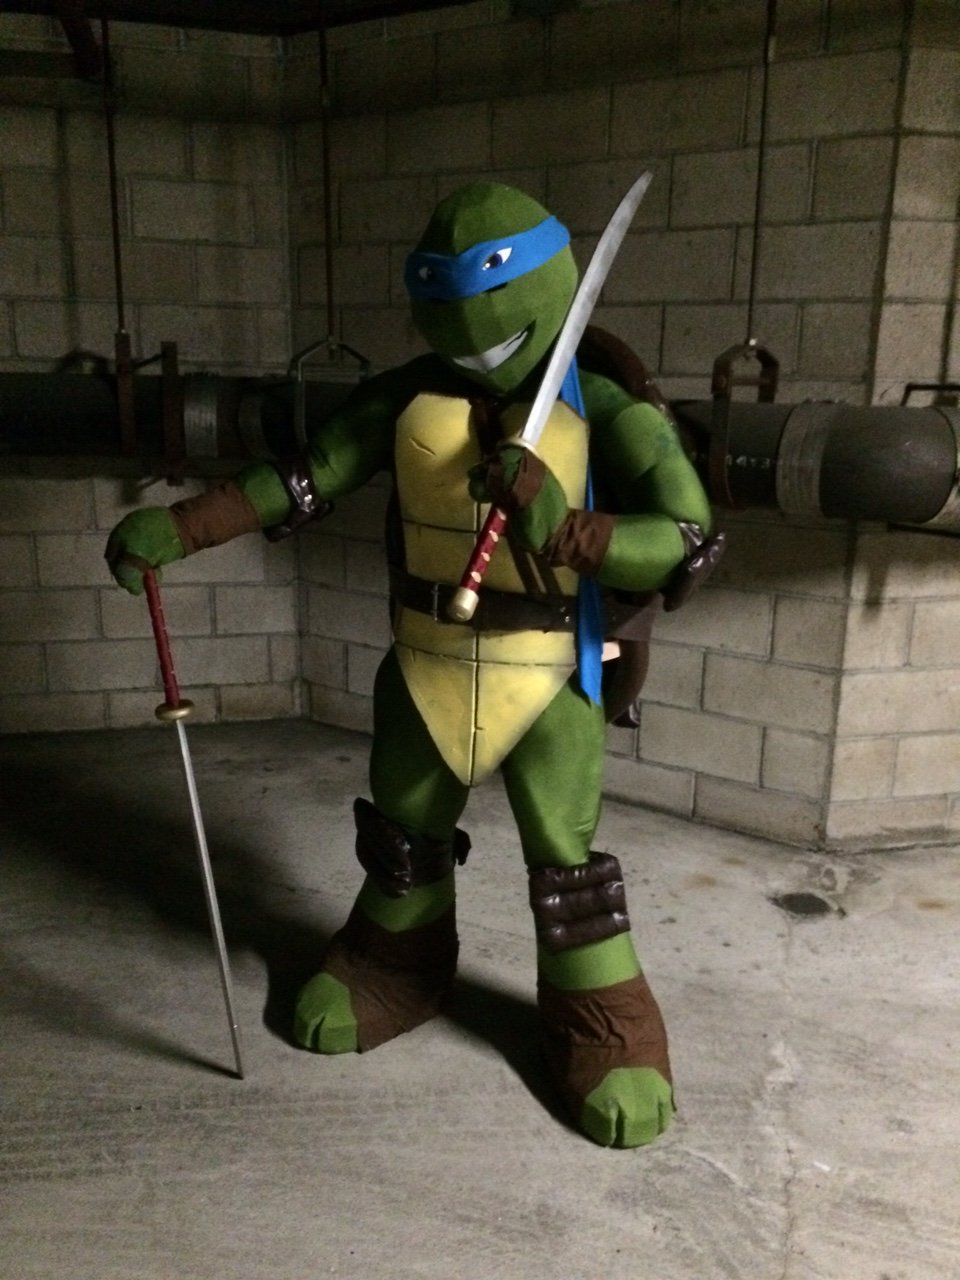 This offbrand Ninja gear company is selling a turtle shell costume :  r/CrappyDesign